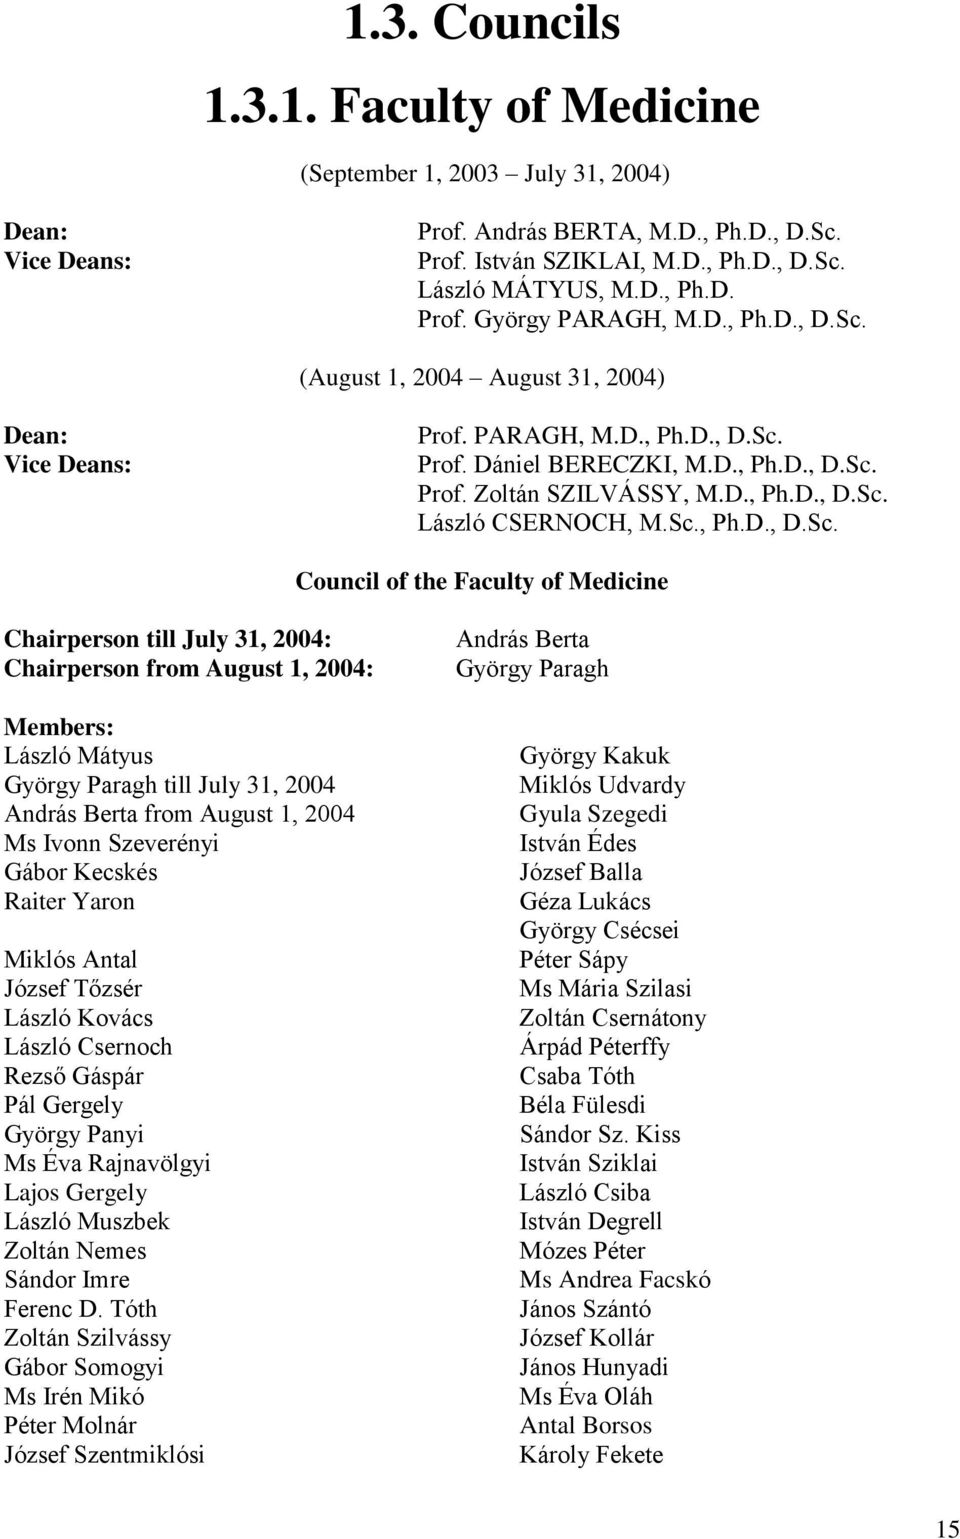 Sc., Ph.D., D.Sc. Council of the Faculty of Medicine Chairperson till July 31, 2004: Chairperson from August 1, 2004: Members: László Mátyus György Paragh till July 31, 2004 András Berta from August